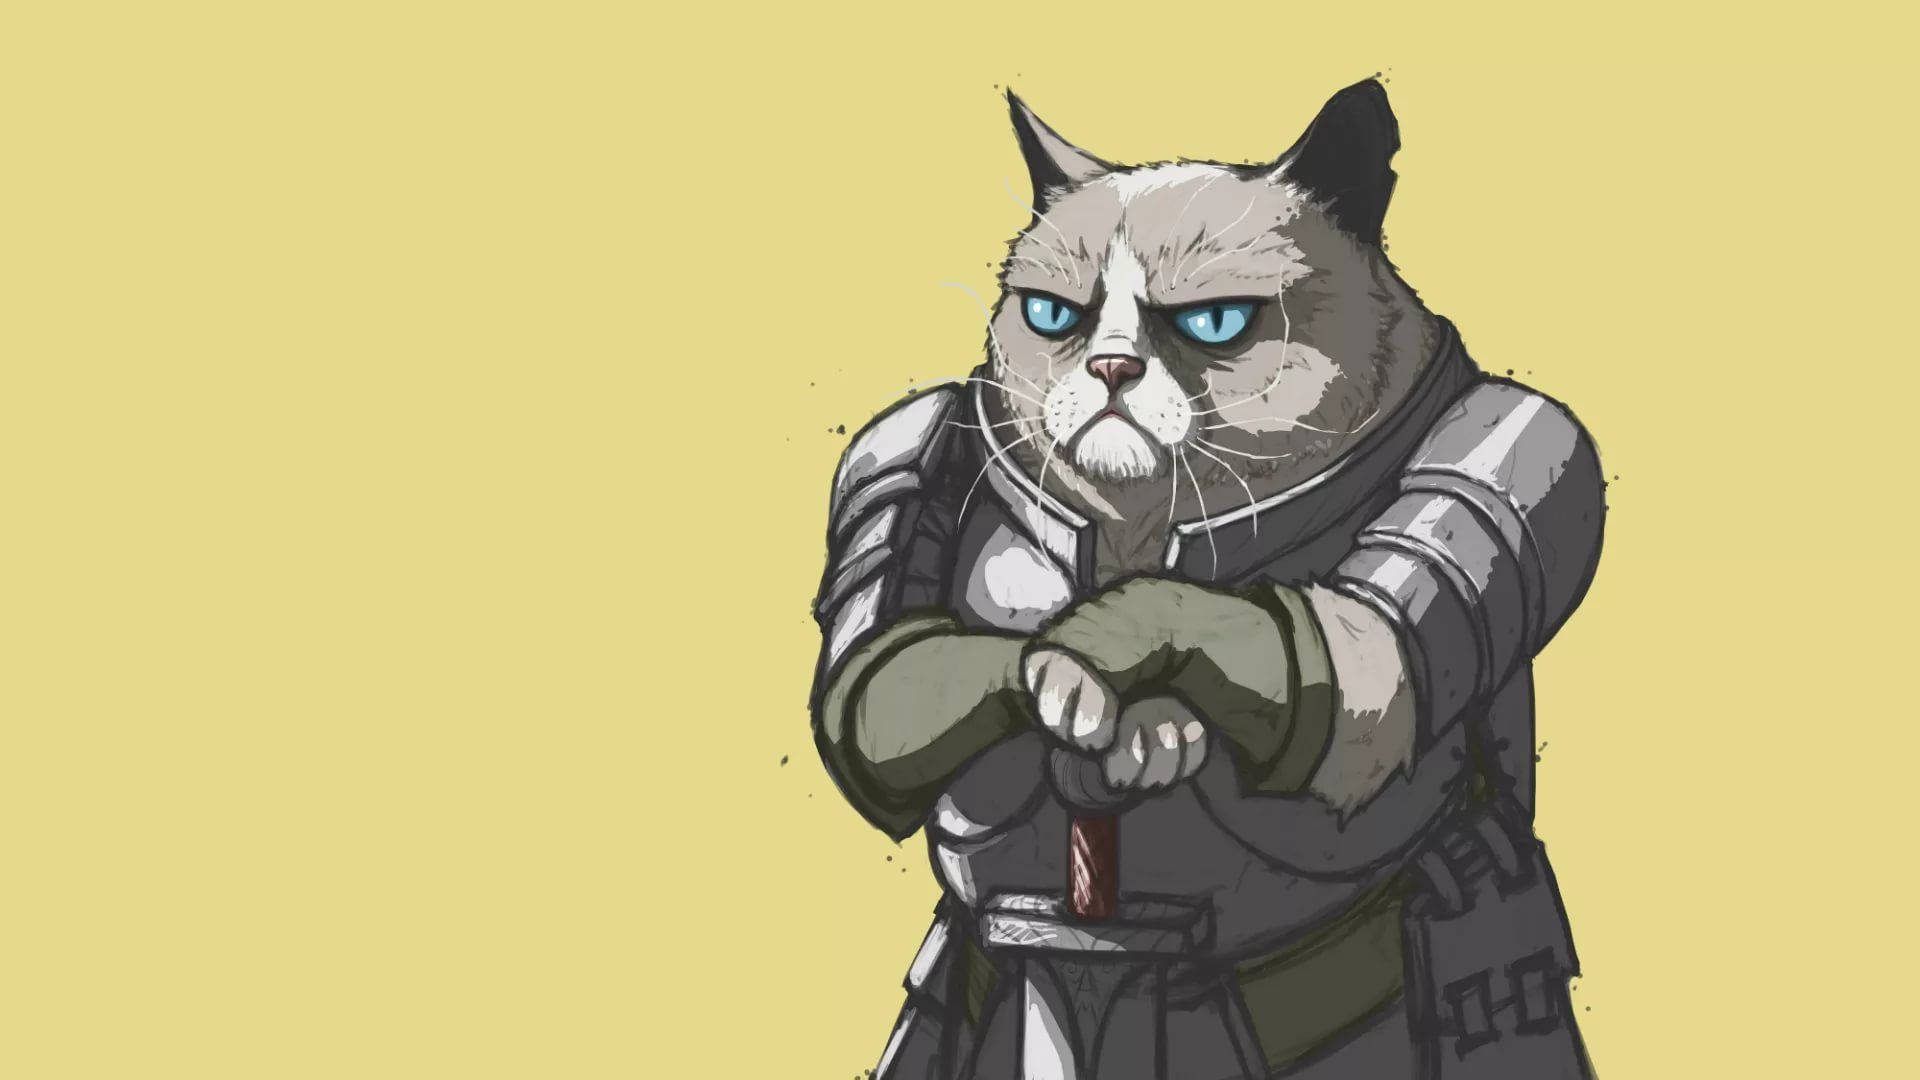 Cat meme wearing a metal steel armor with a grumpy expression.